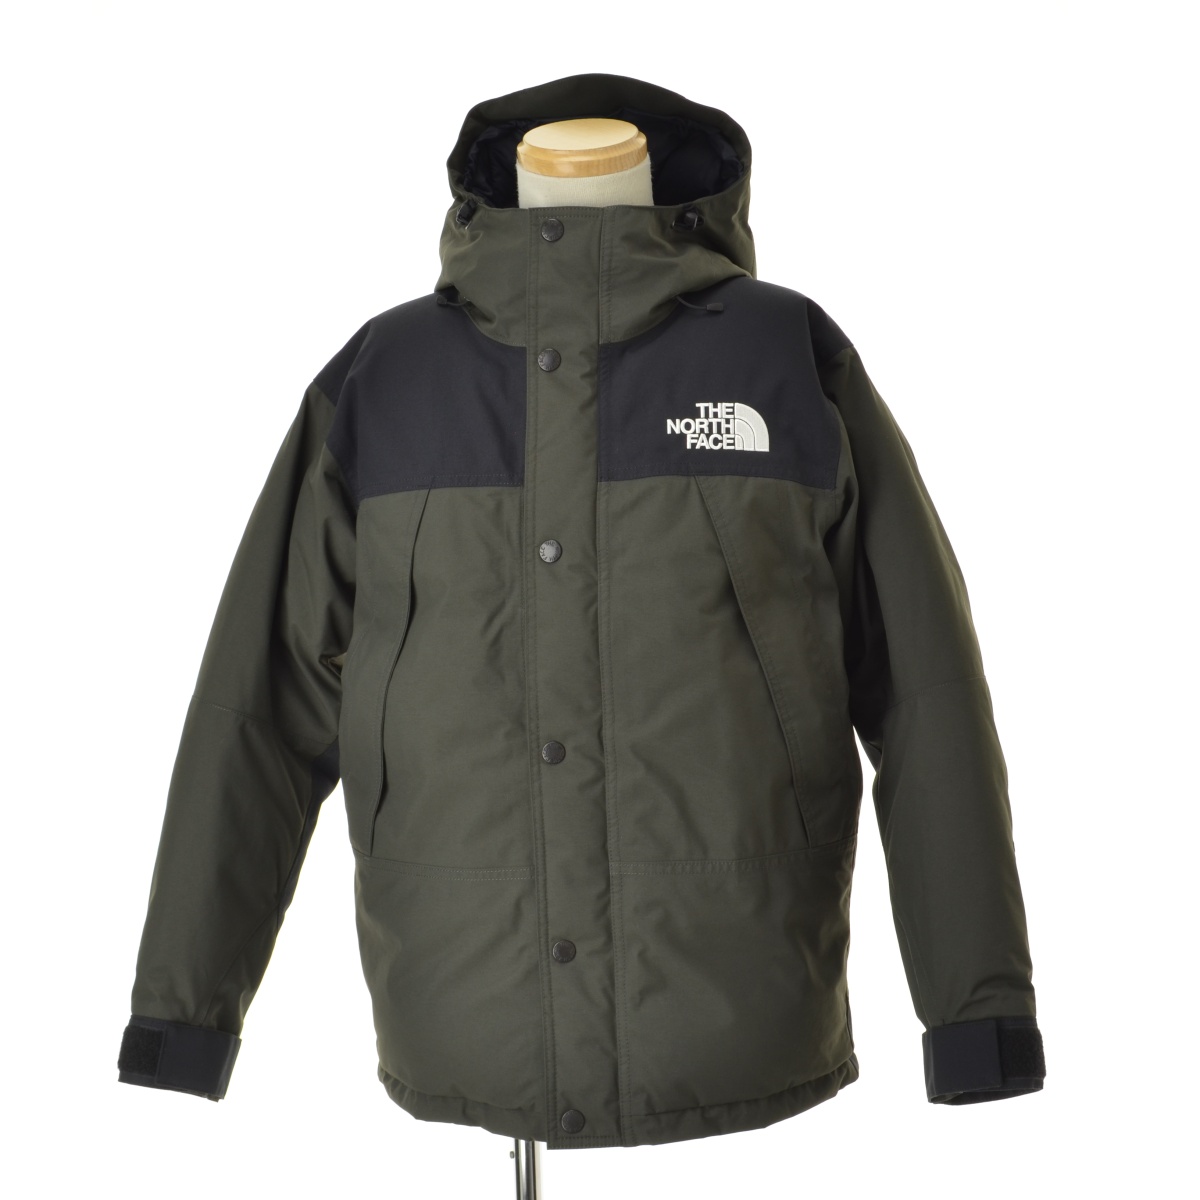 THE NORTH FACE / Ρեθ17AW ND91737 Mountain Down Jacket ޥƥ󥸥㥱å P ԡȥ󥸥㥱åȡרܺٲ